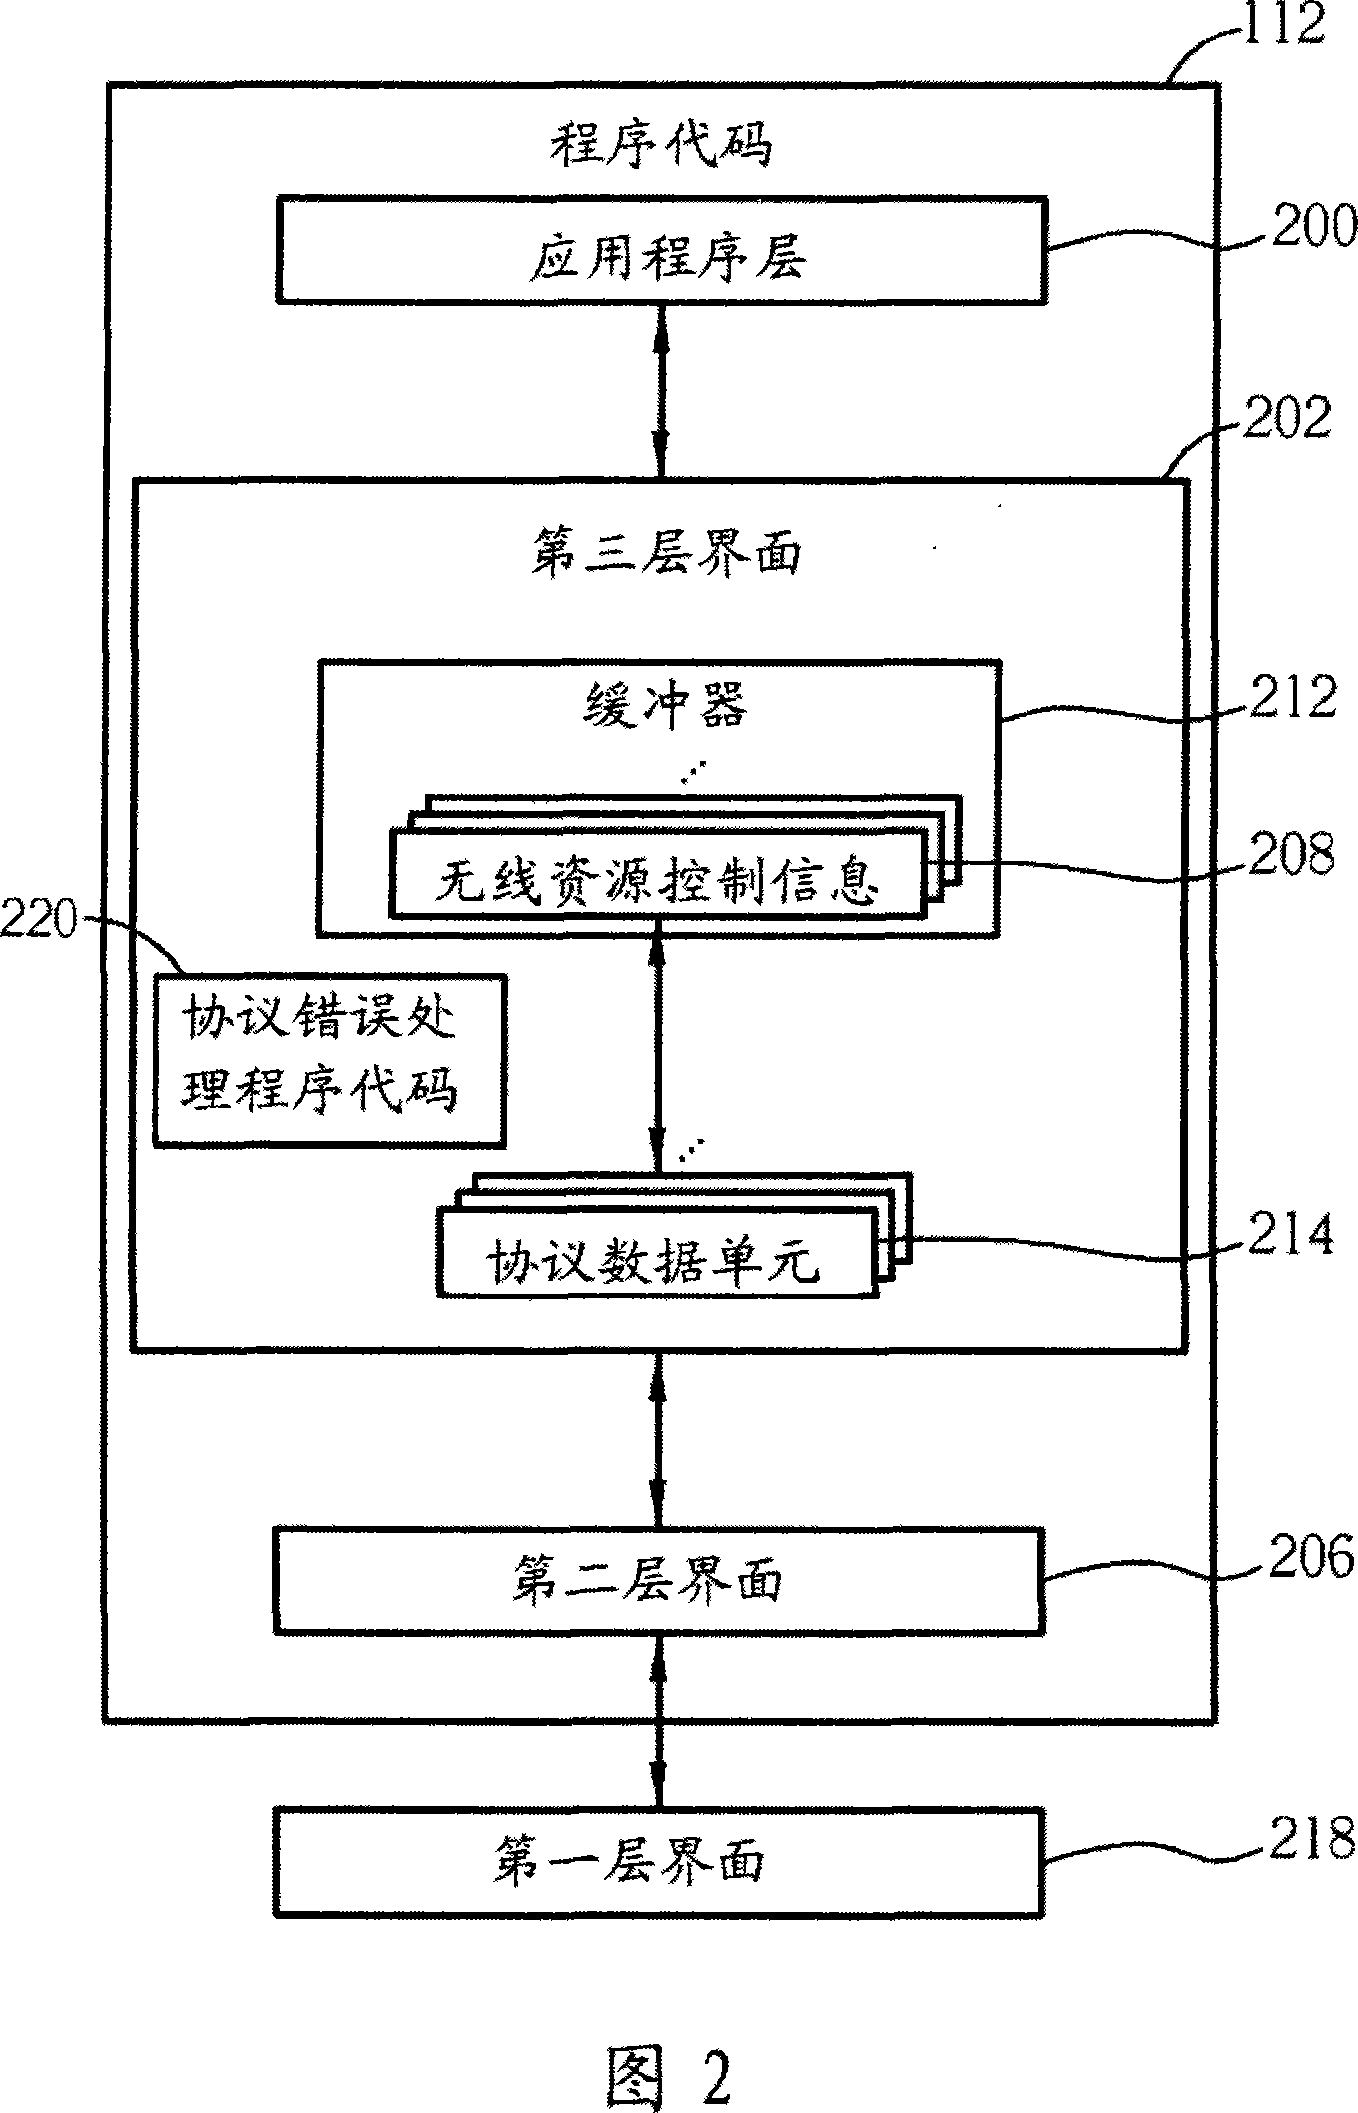 Method and apparatus for handling protocol error in a wireless communications system